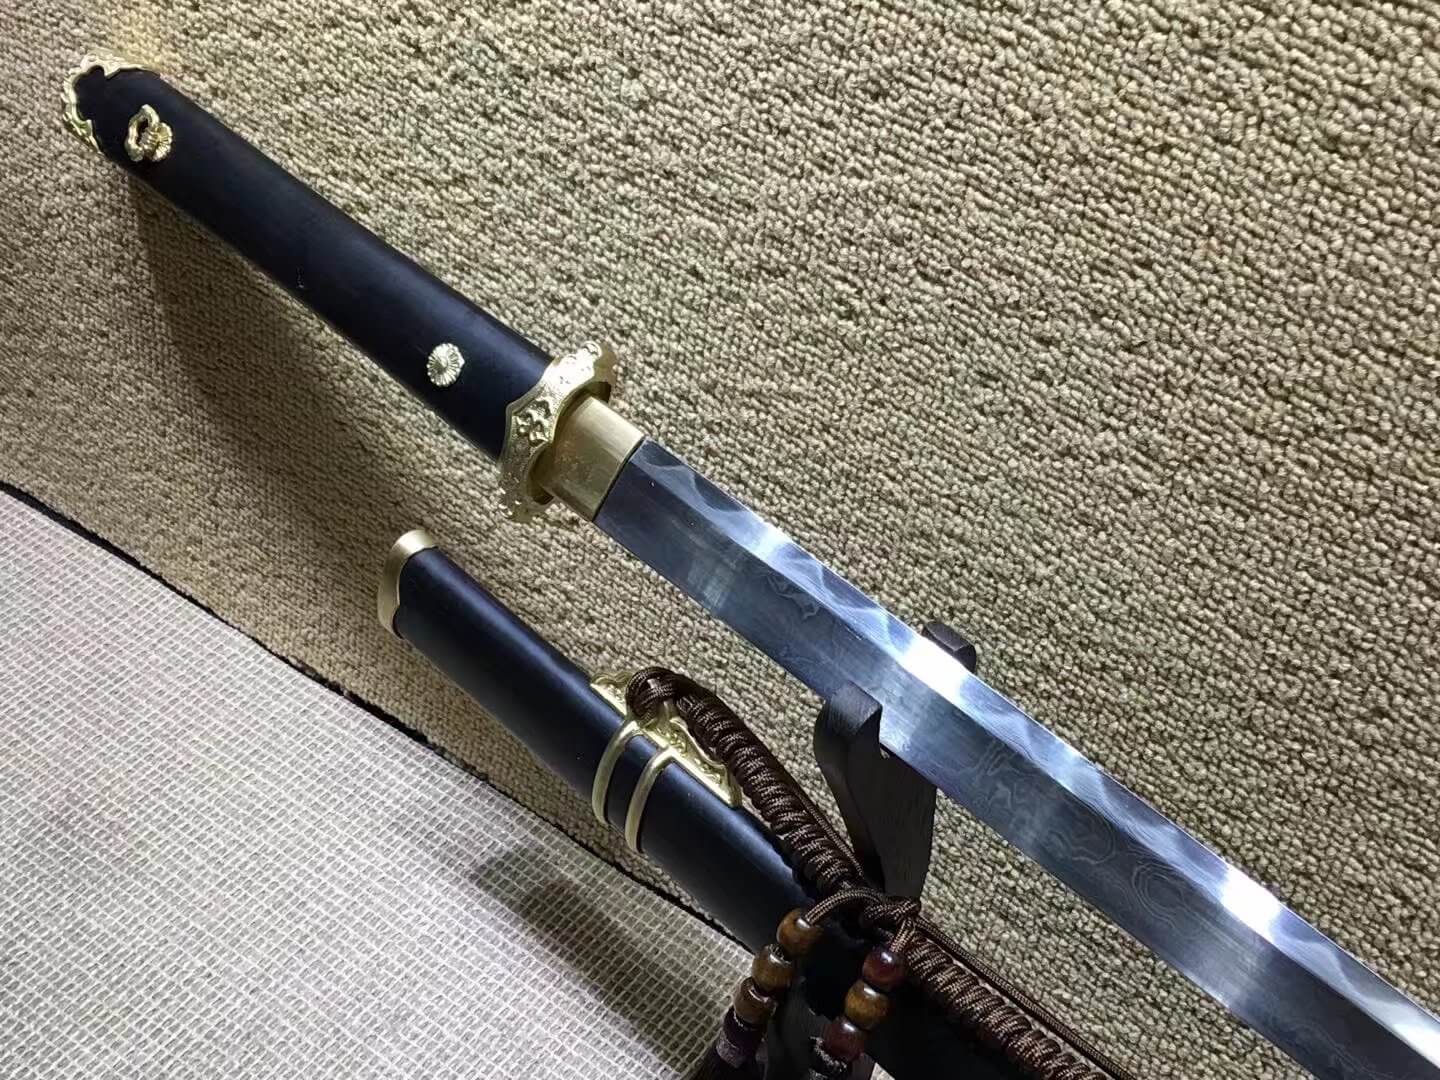 Tang dao,Damascus steel burn blade,Brass fittings,Black scabbard - Chinese sword shop